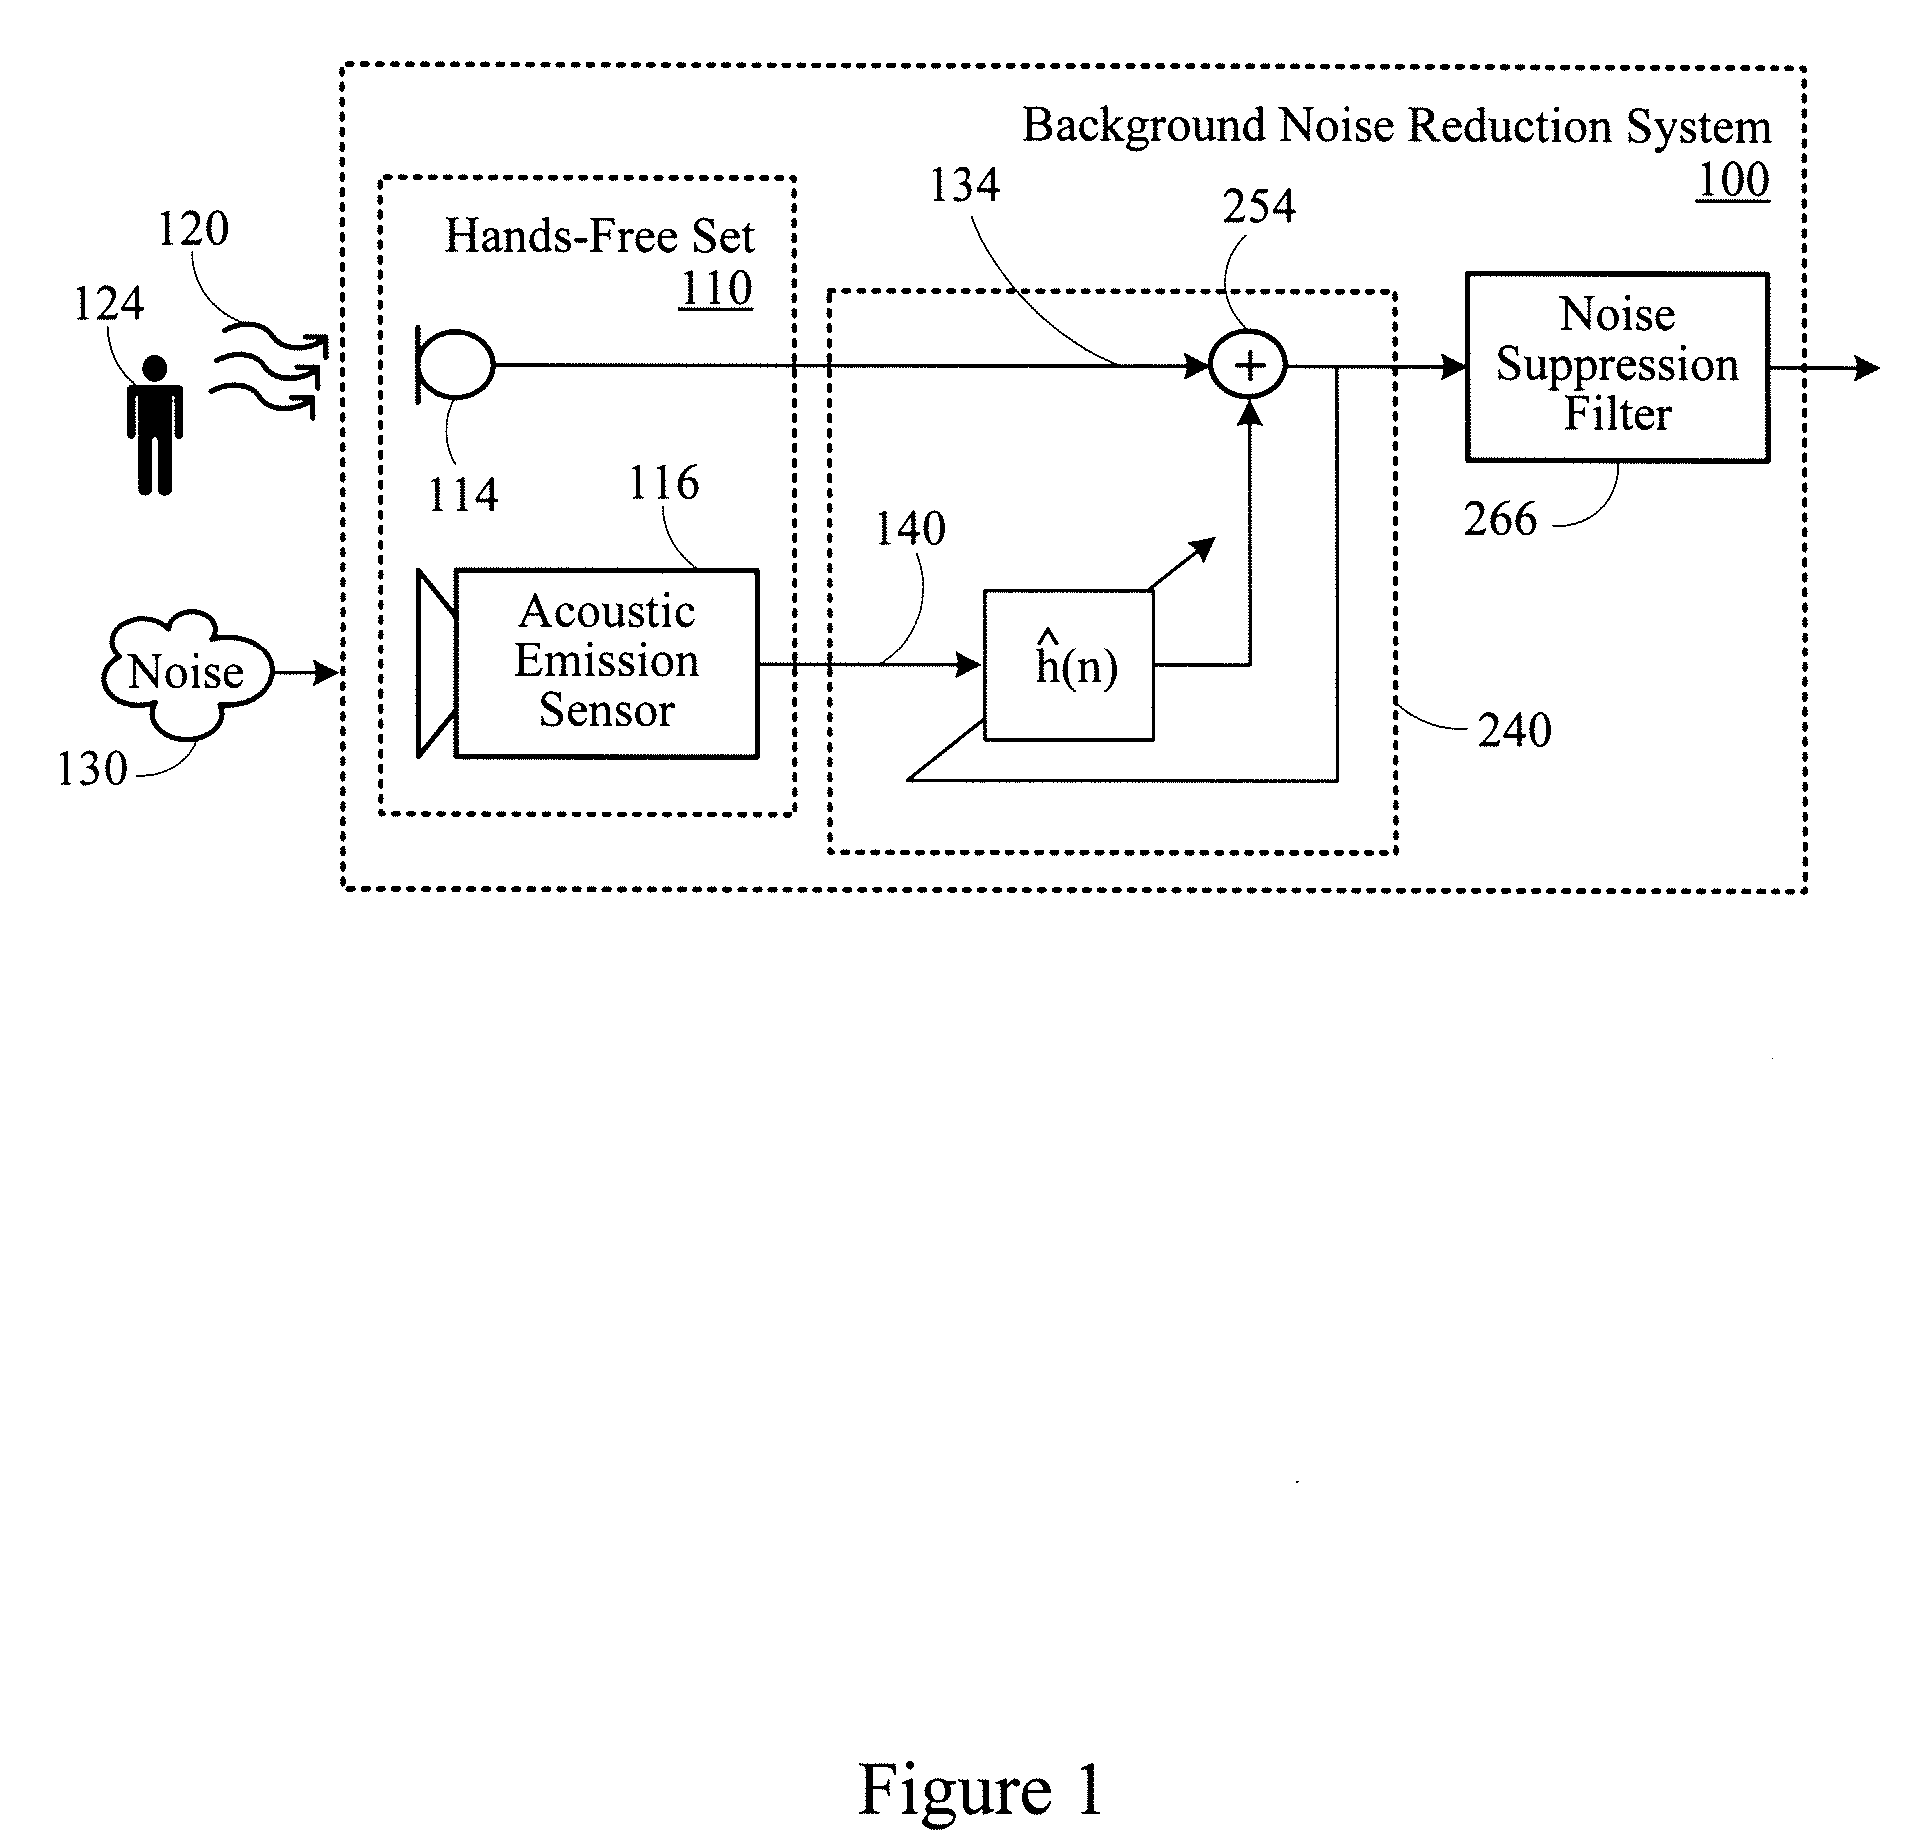 Background noise reduction system